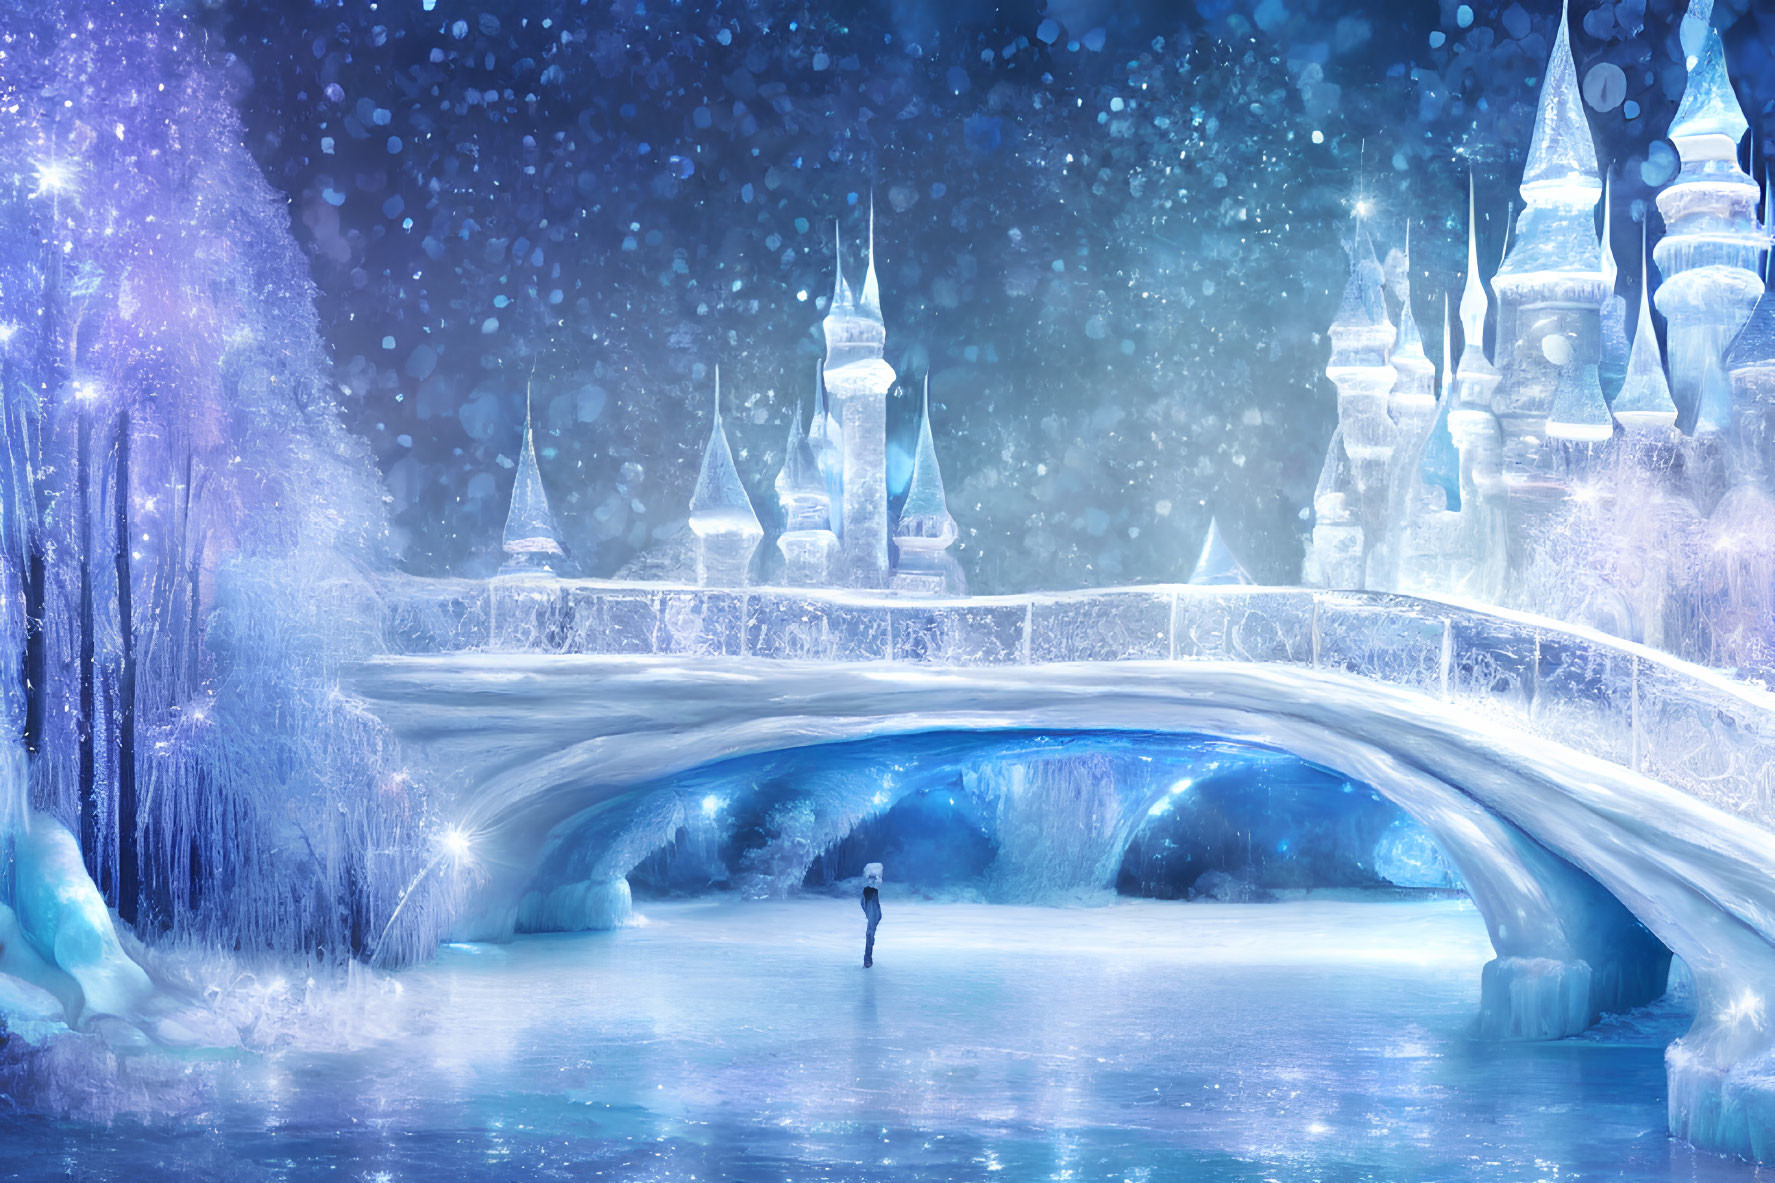 Person gazes at icy blue castle in winter wonderland